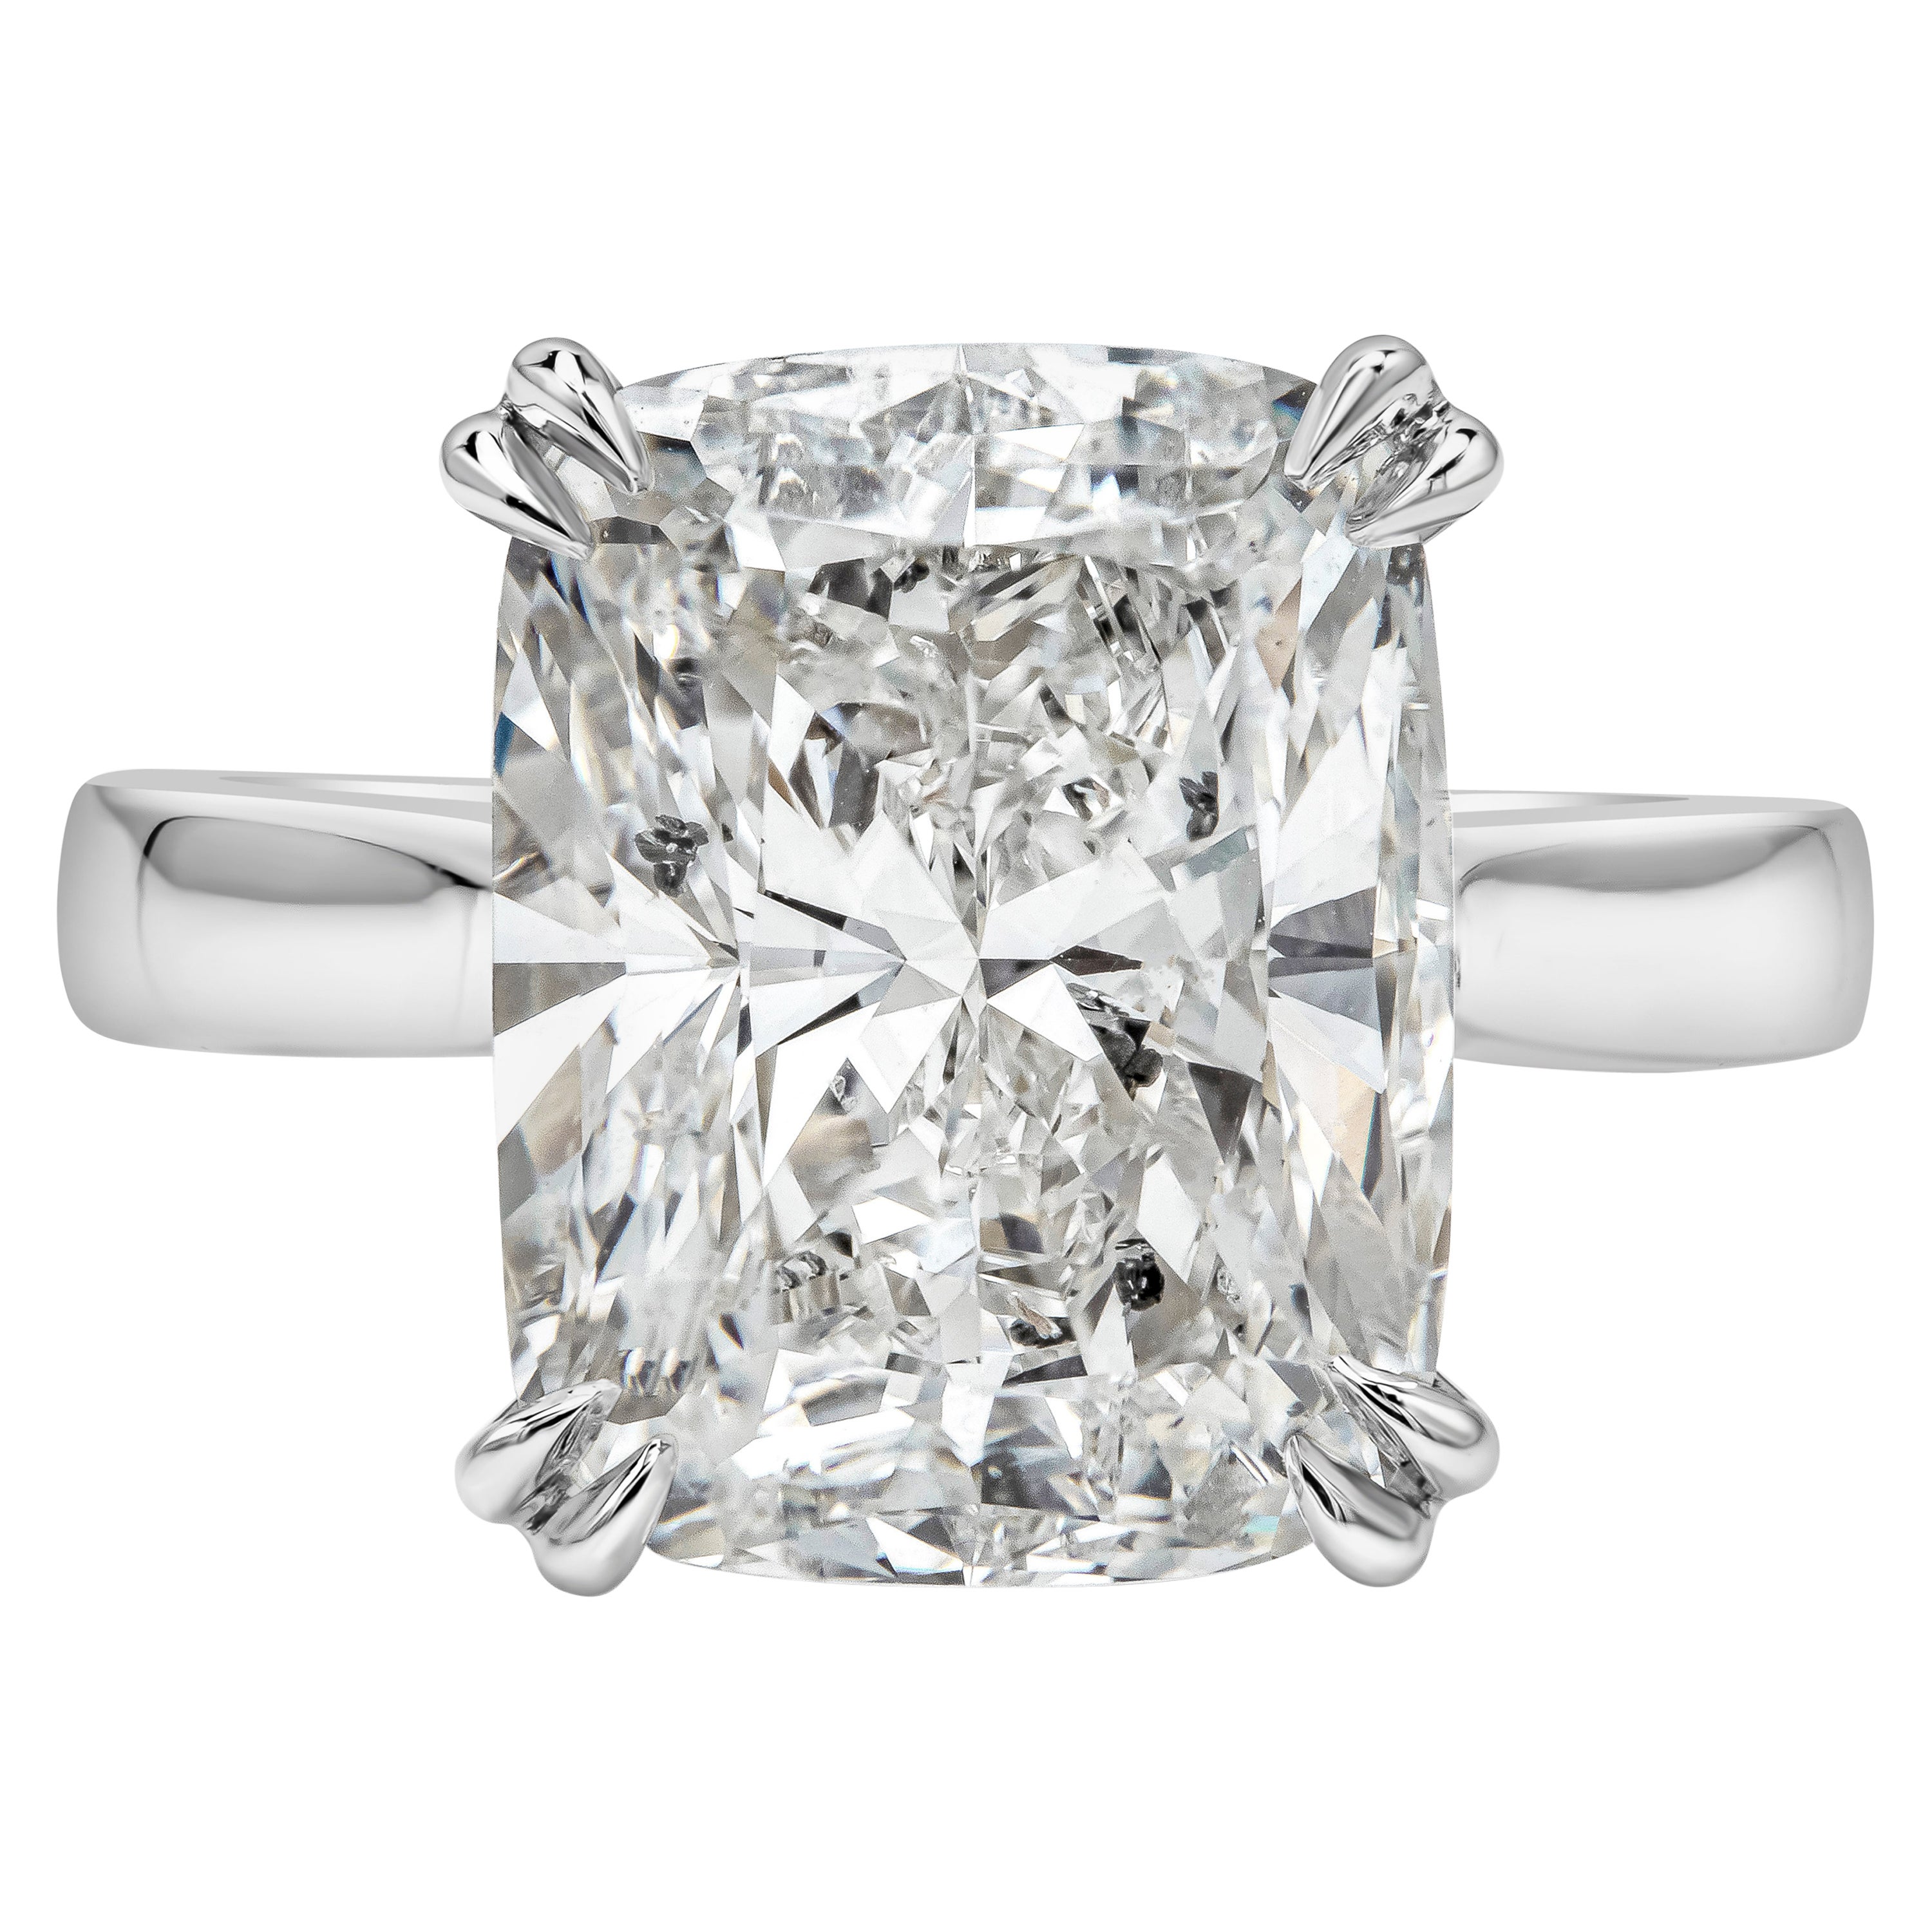 GIA Certified 7.76 Carat Cushion Cut Diamond Solitaire Engagement Ring